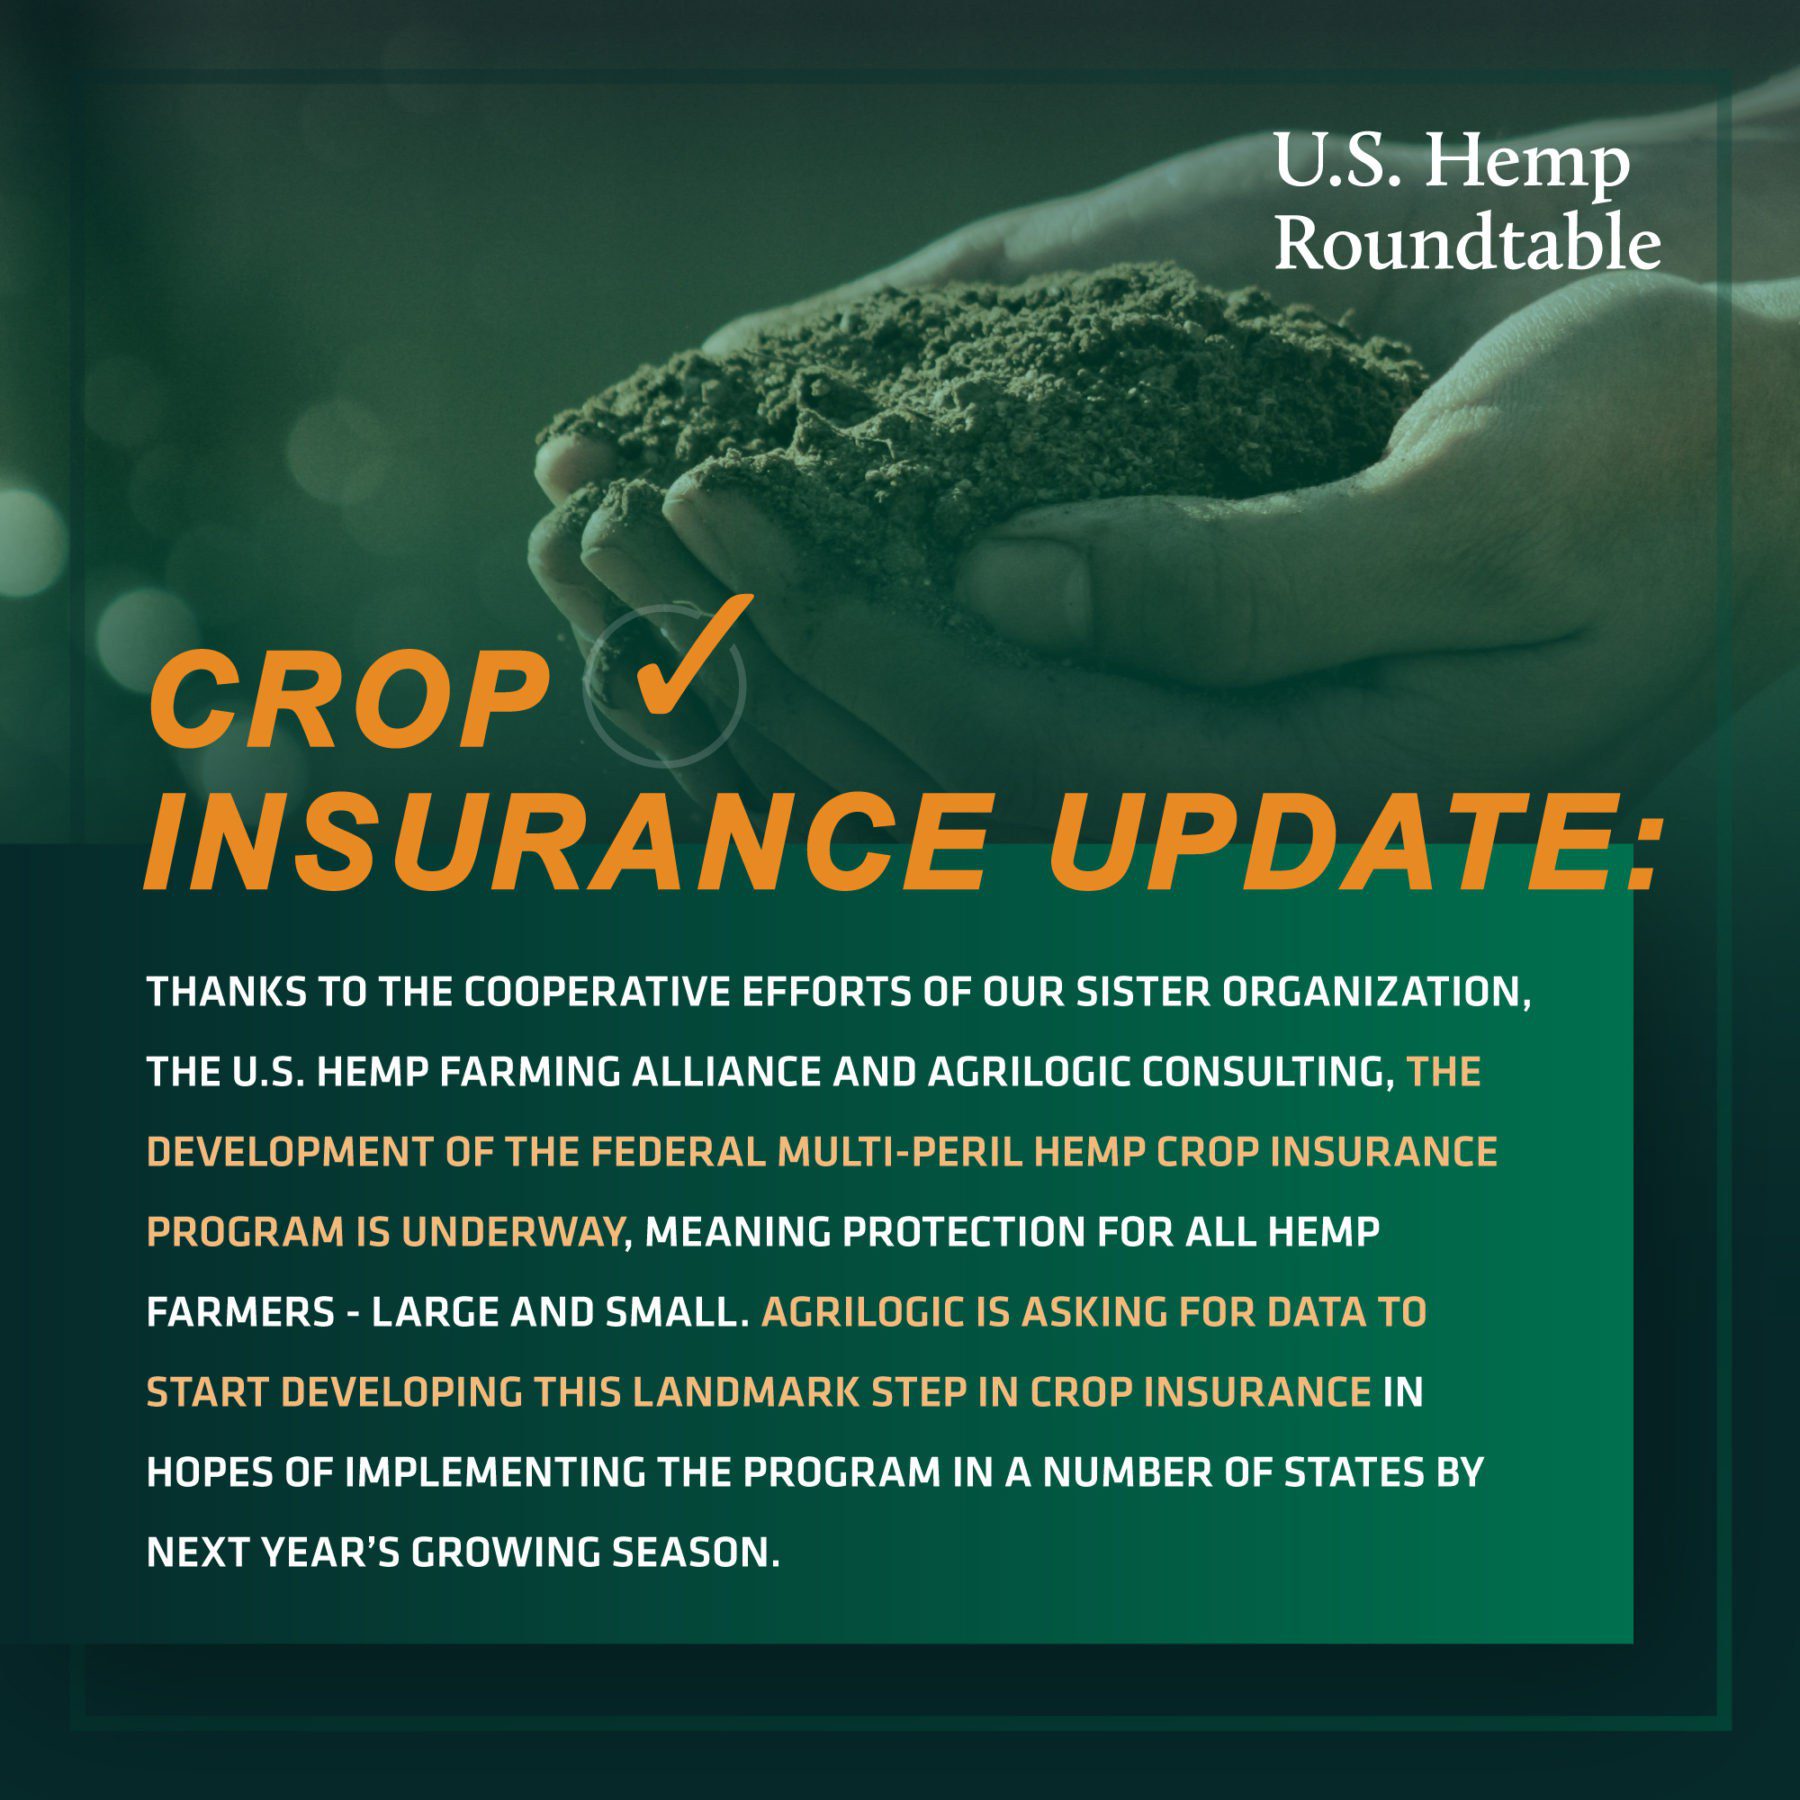 Help Deliver Affordable Crop Insurance to U.S. Hemp Farmers